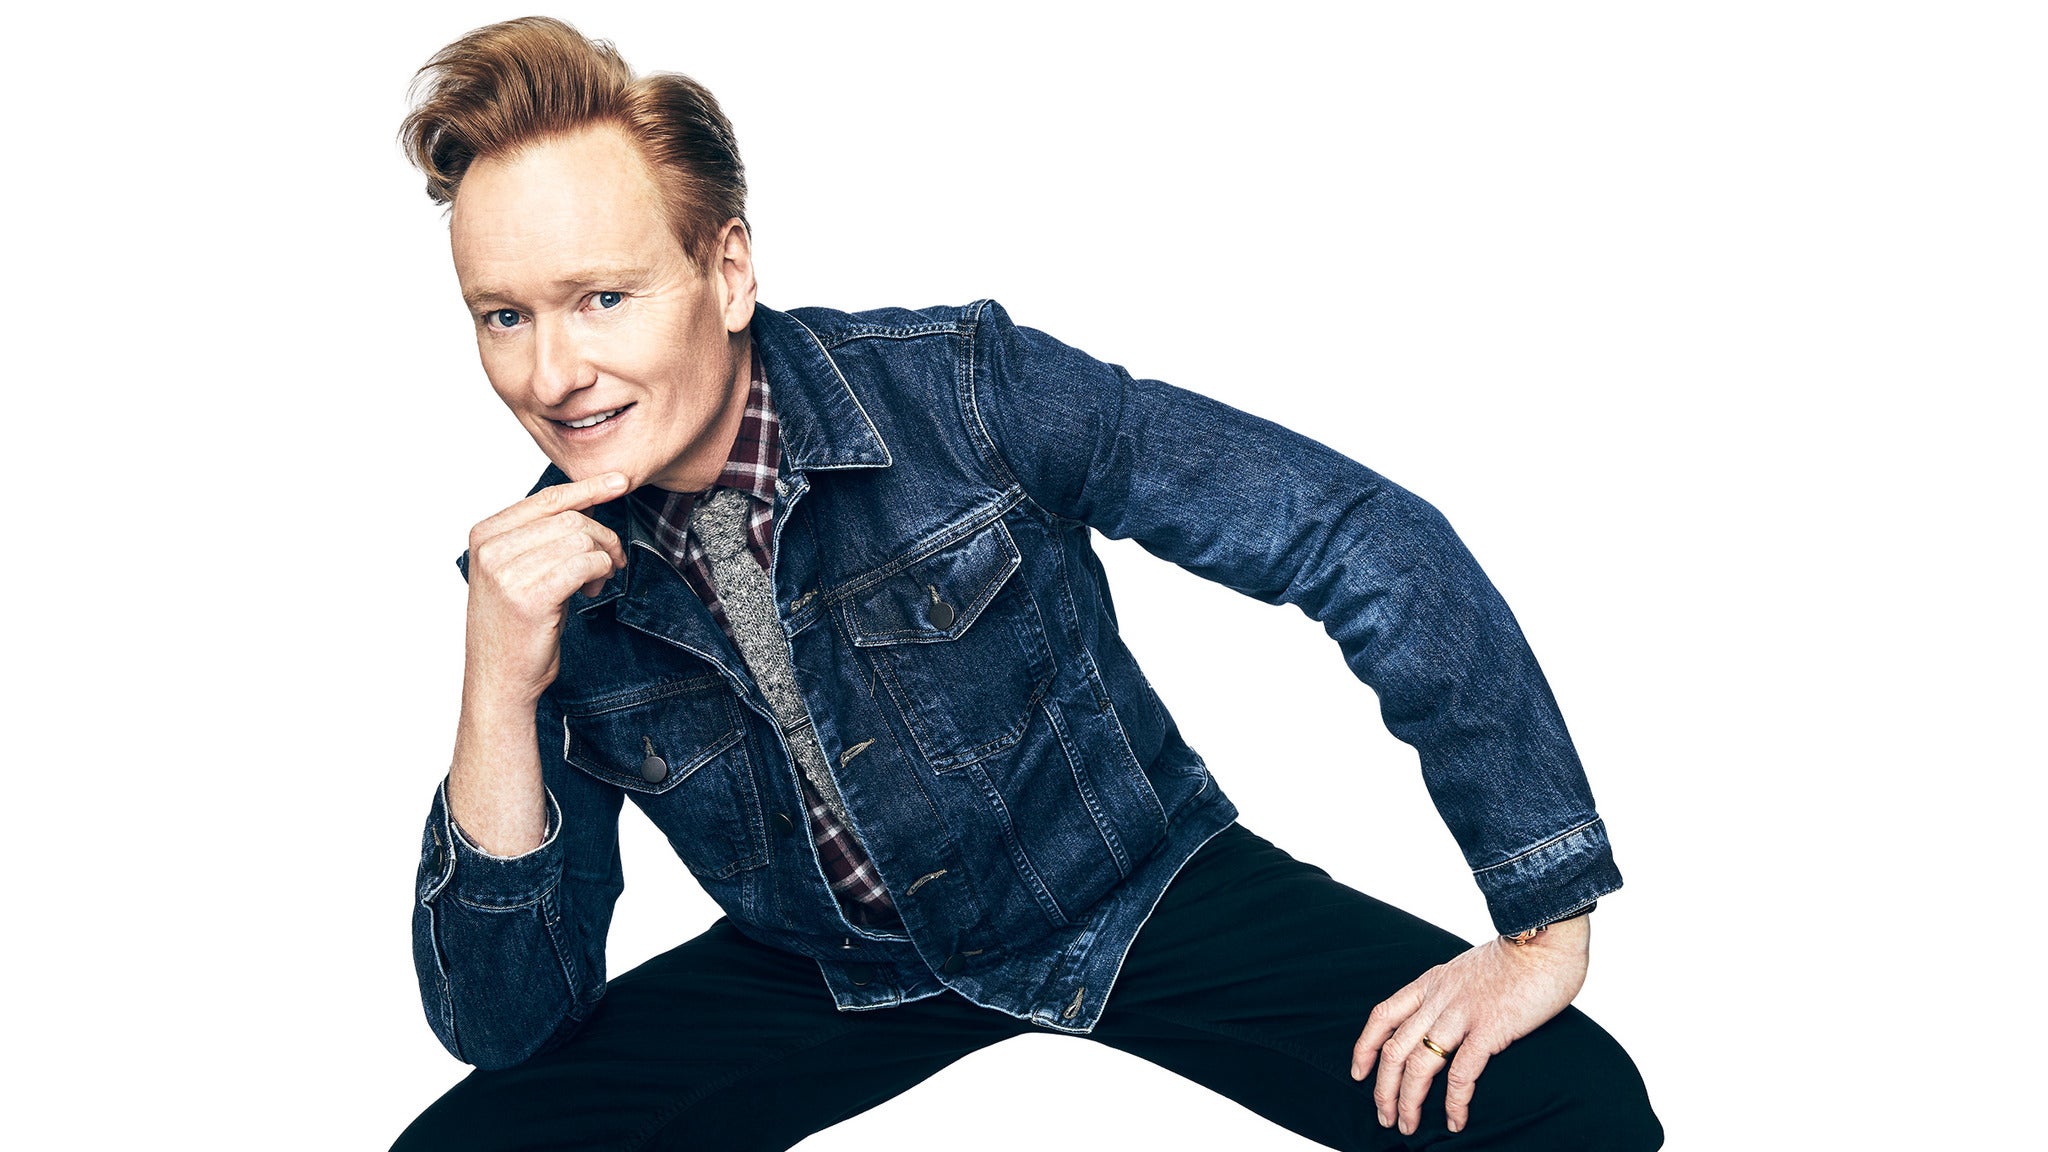 Conan O'Brien Needs A Friend in Los Angeles promo photo for Official Platinum presale offer code